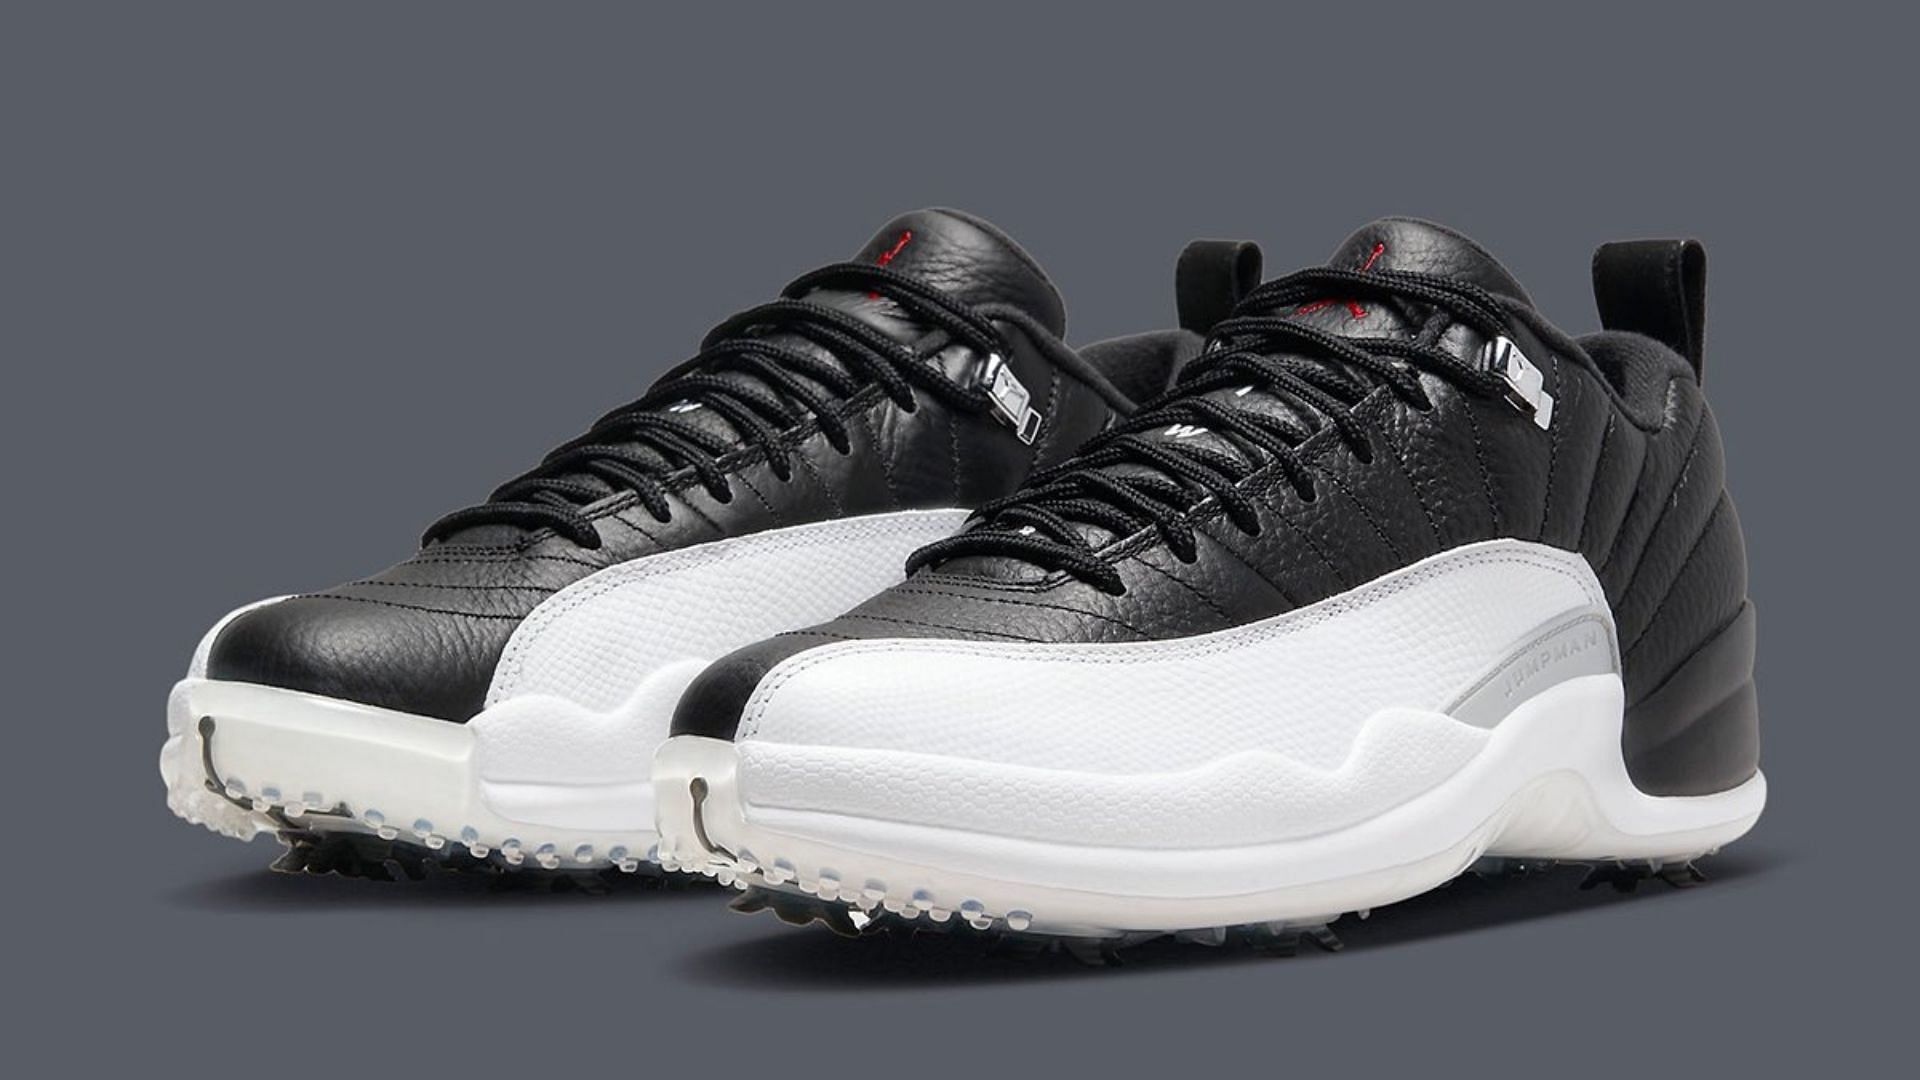 Where to buy Air Jordan 12 Low Golf “Playoffs” shoes? Price and